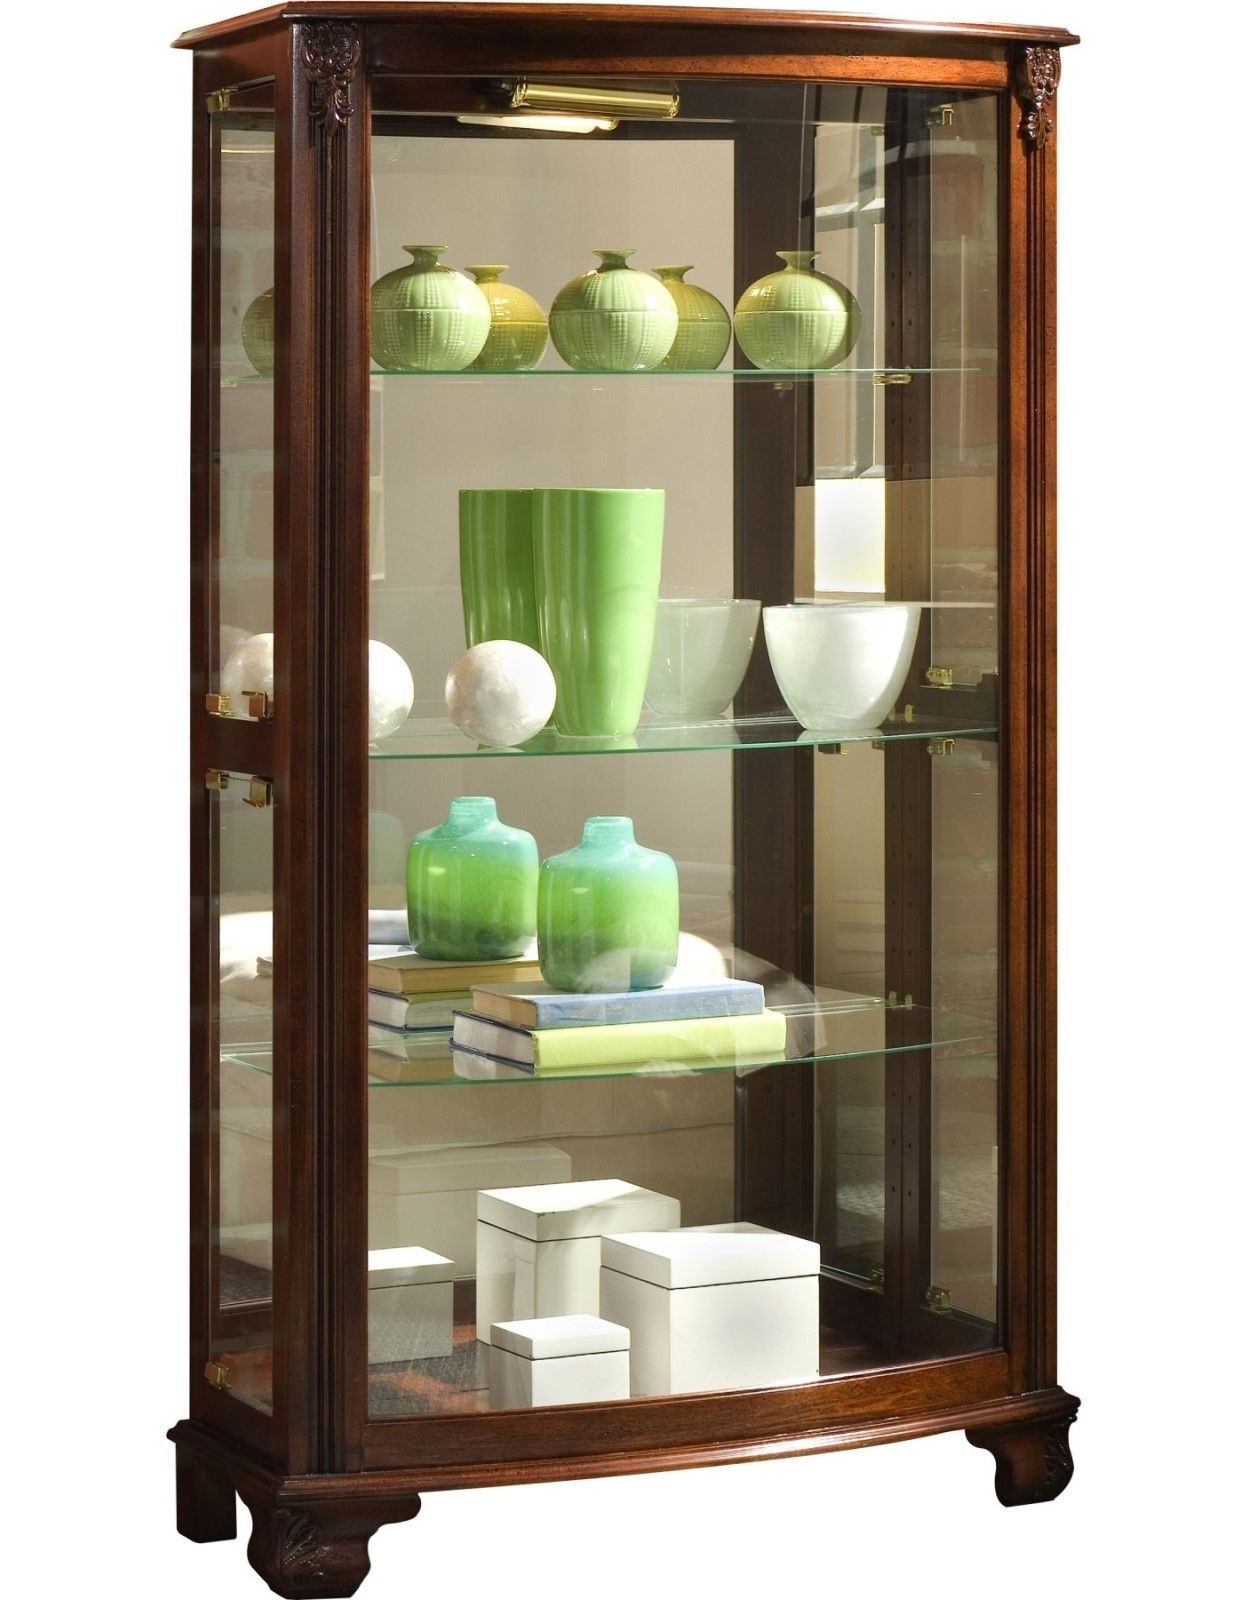 Gallery style 3 shelf fluted mirrored lighted curio